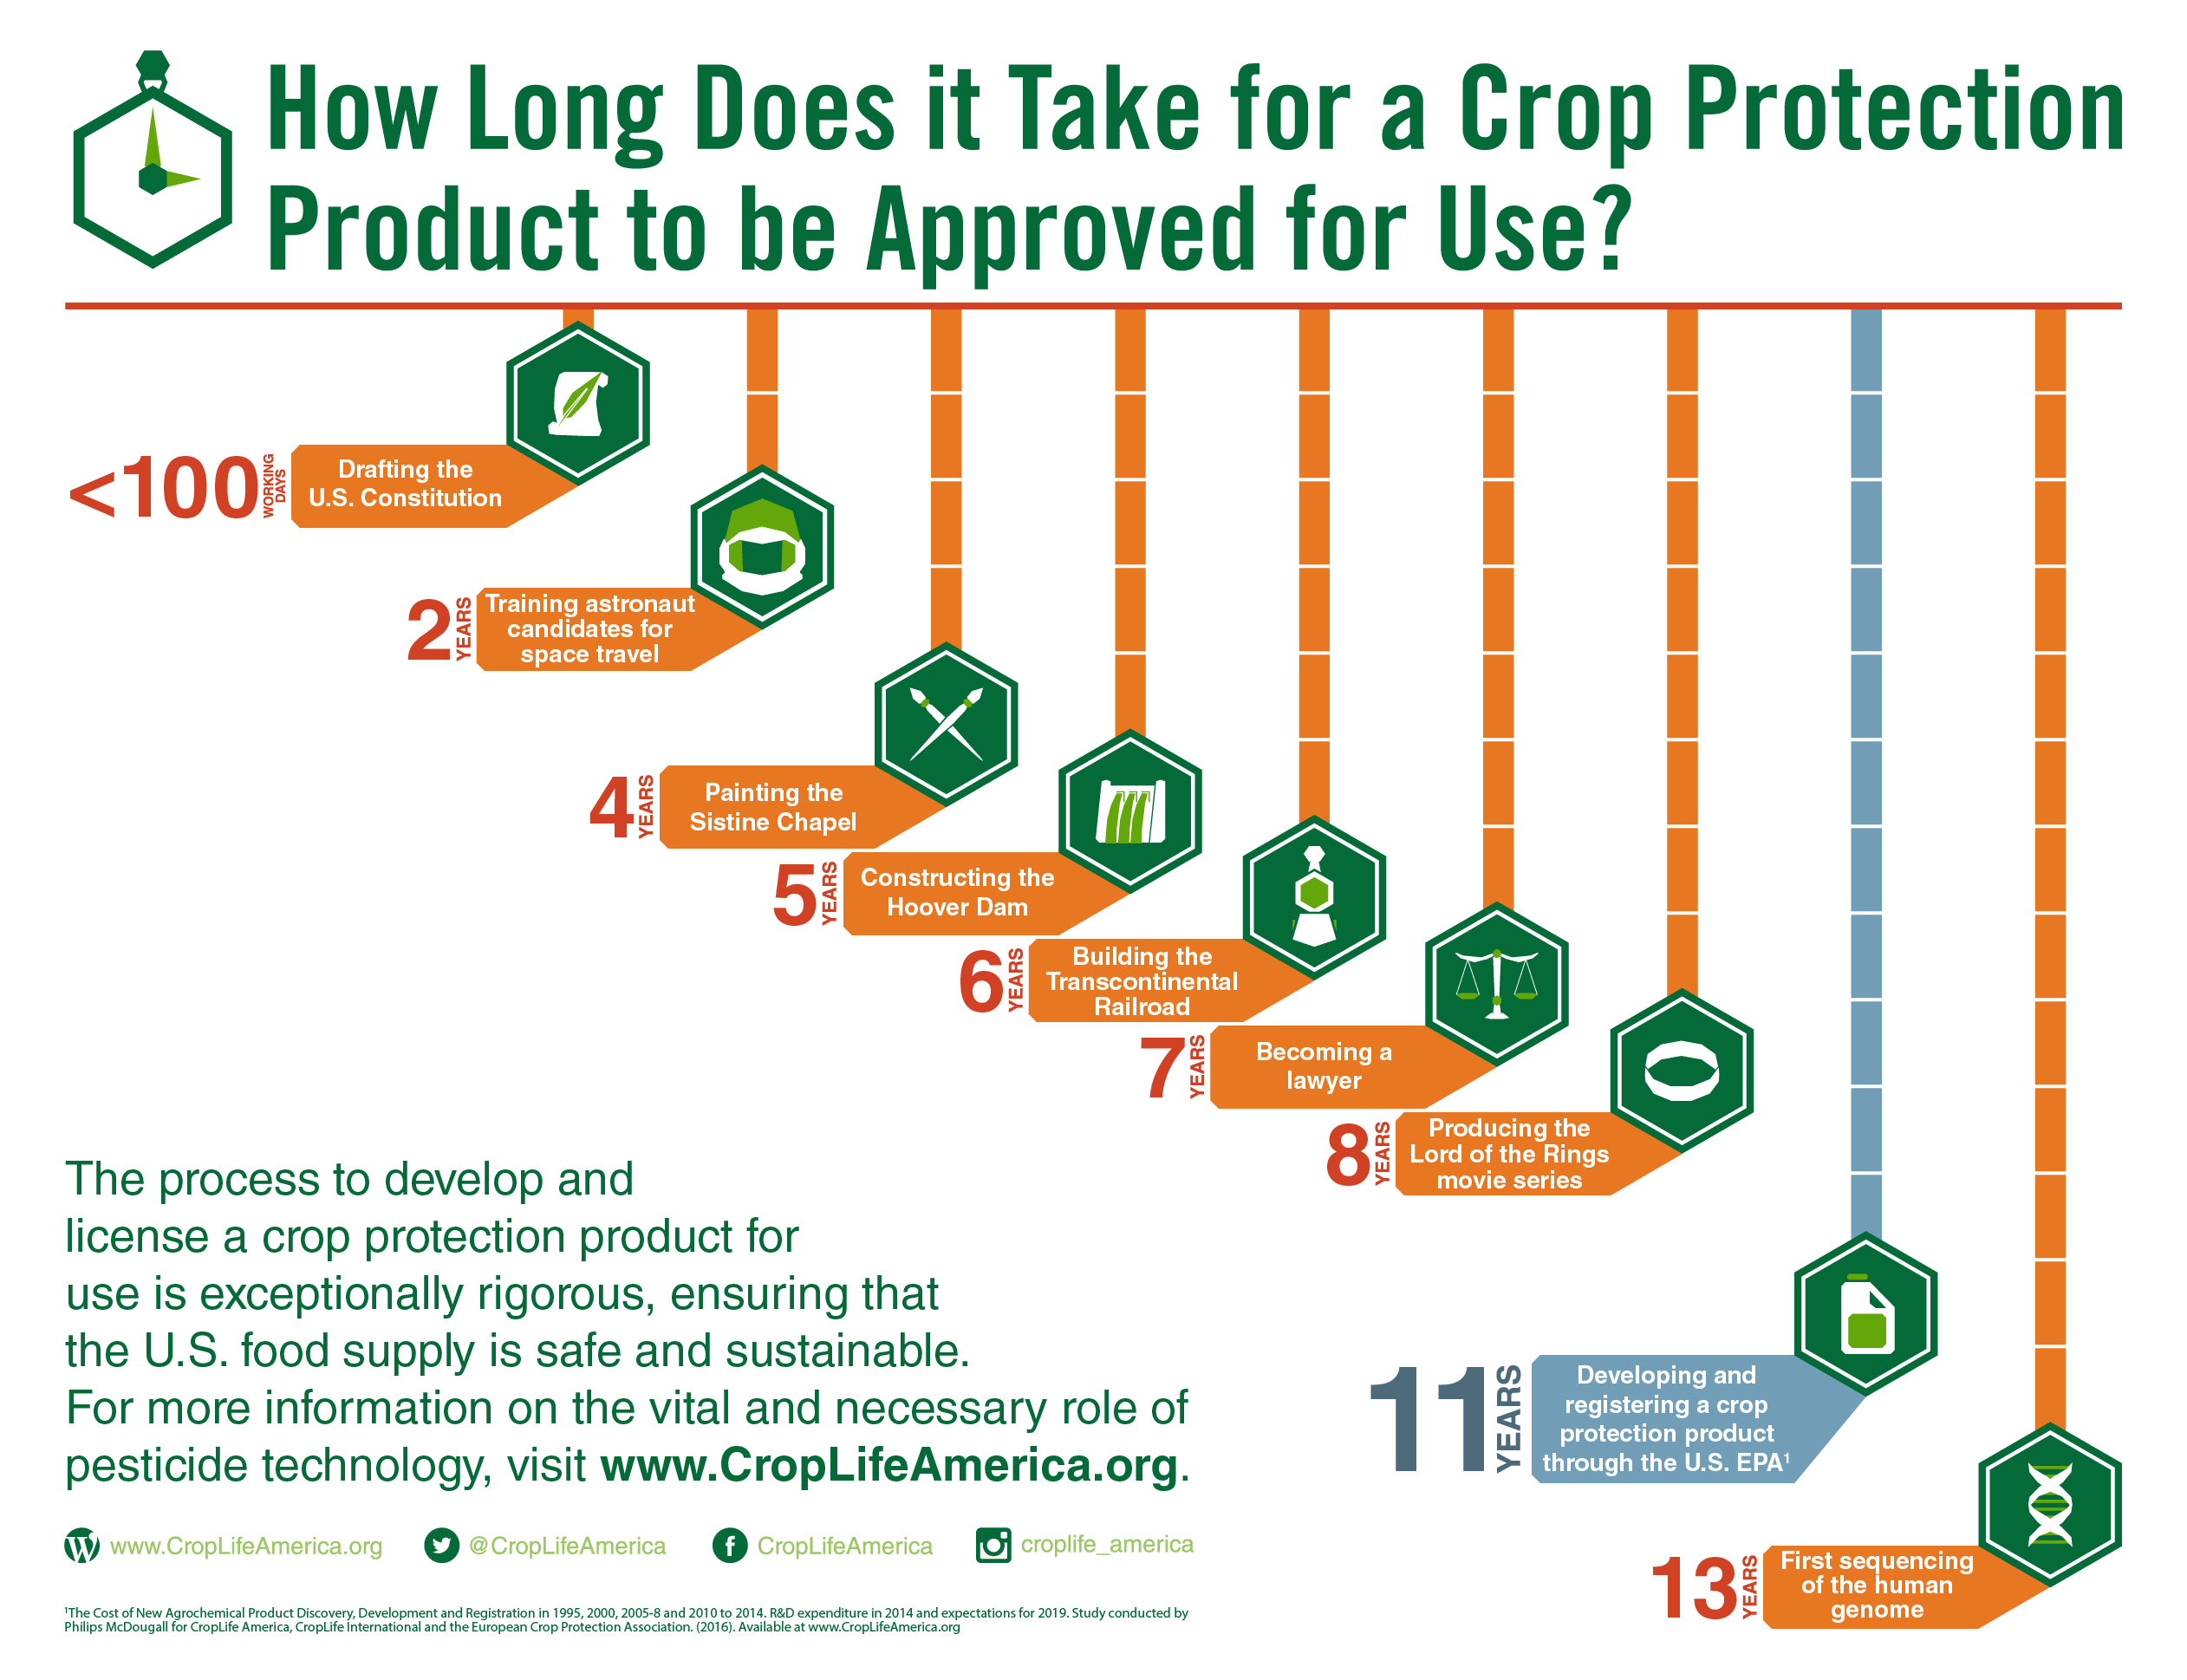 Crop Protection Product Approval Duration